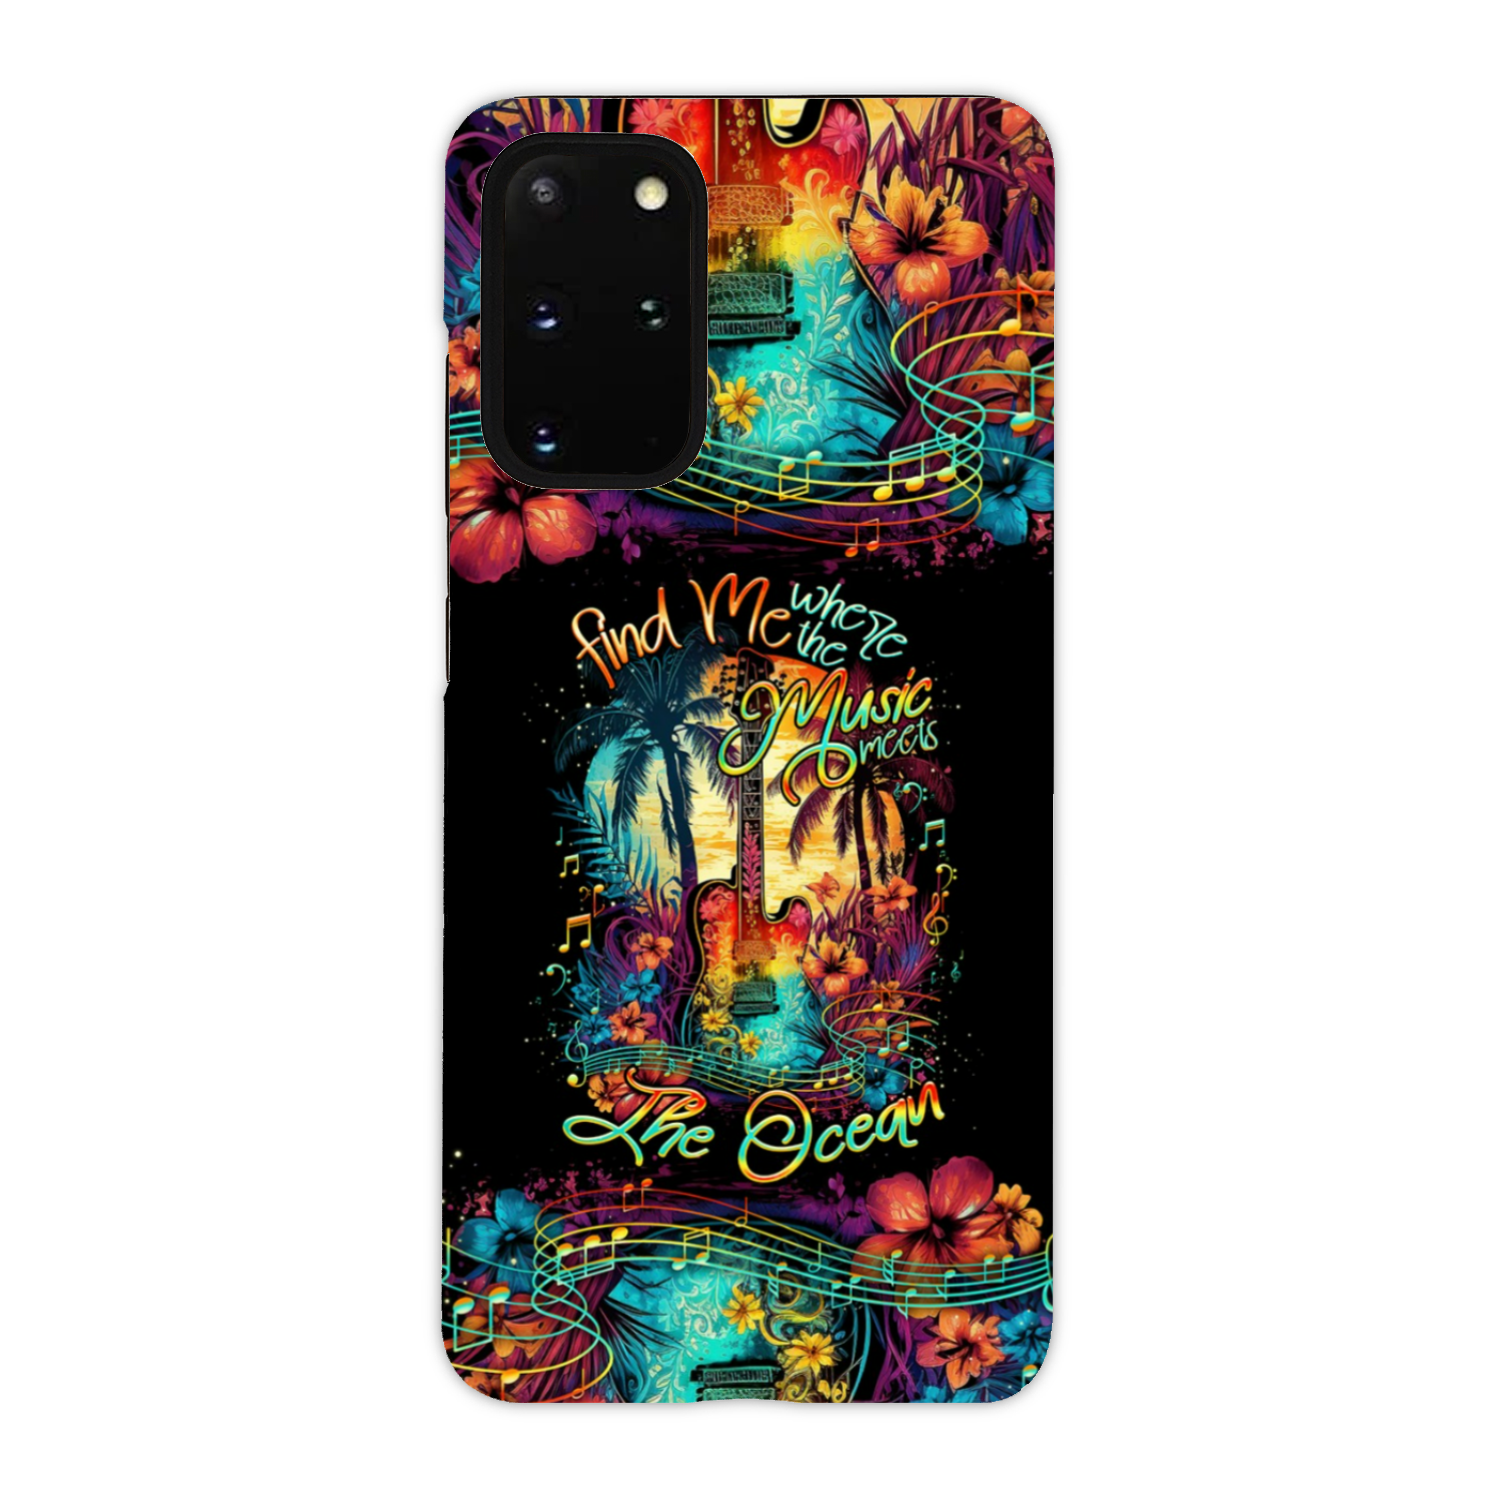 FIND ME WHERE THE MUSIC MEETS THE OCEAN GUITAR PHONE CASE - TLNO1305231